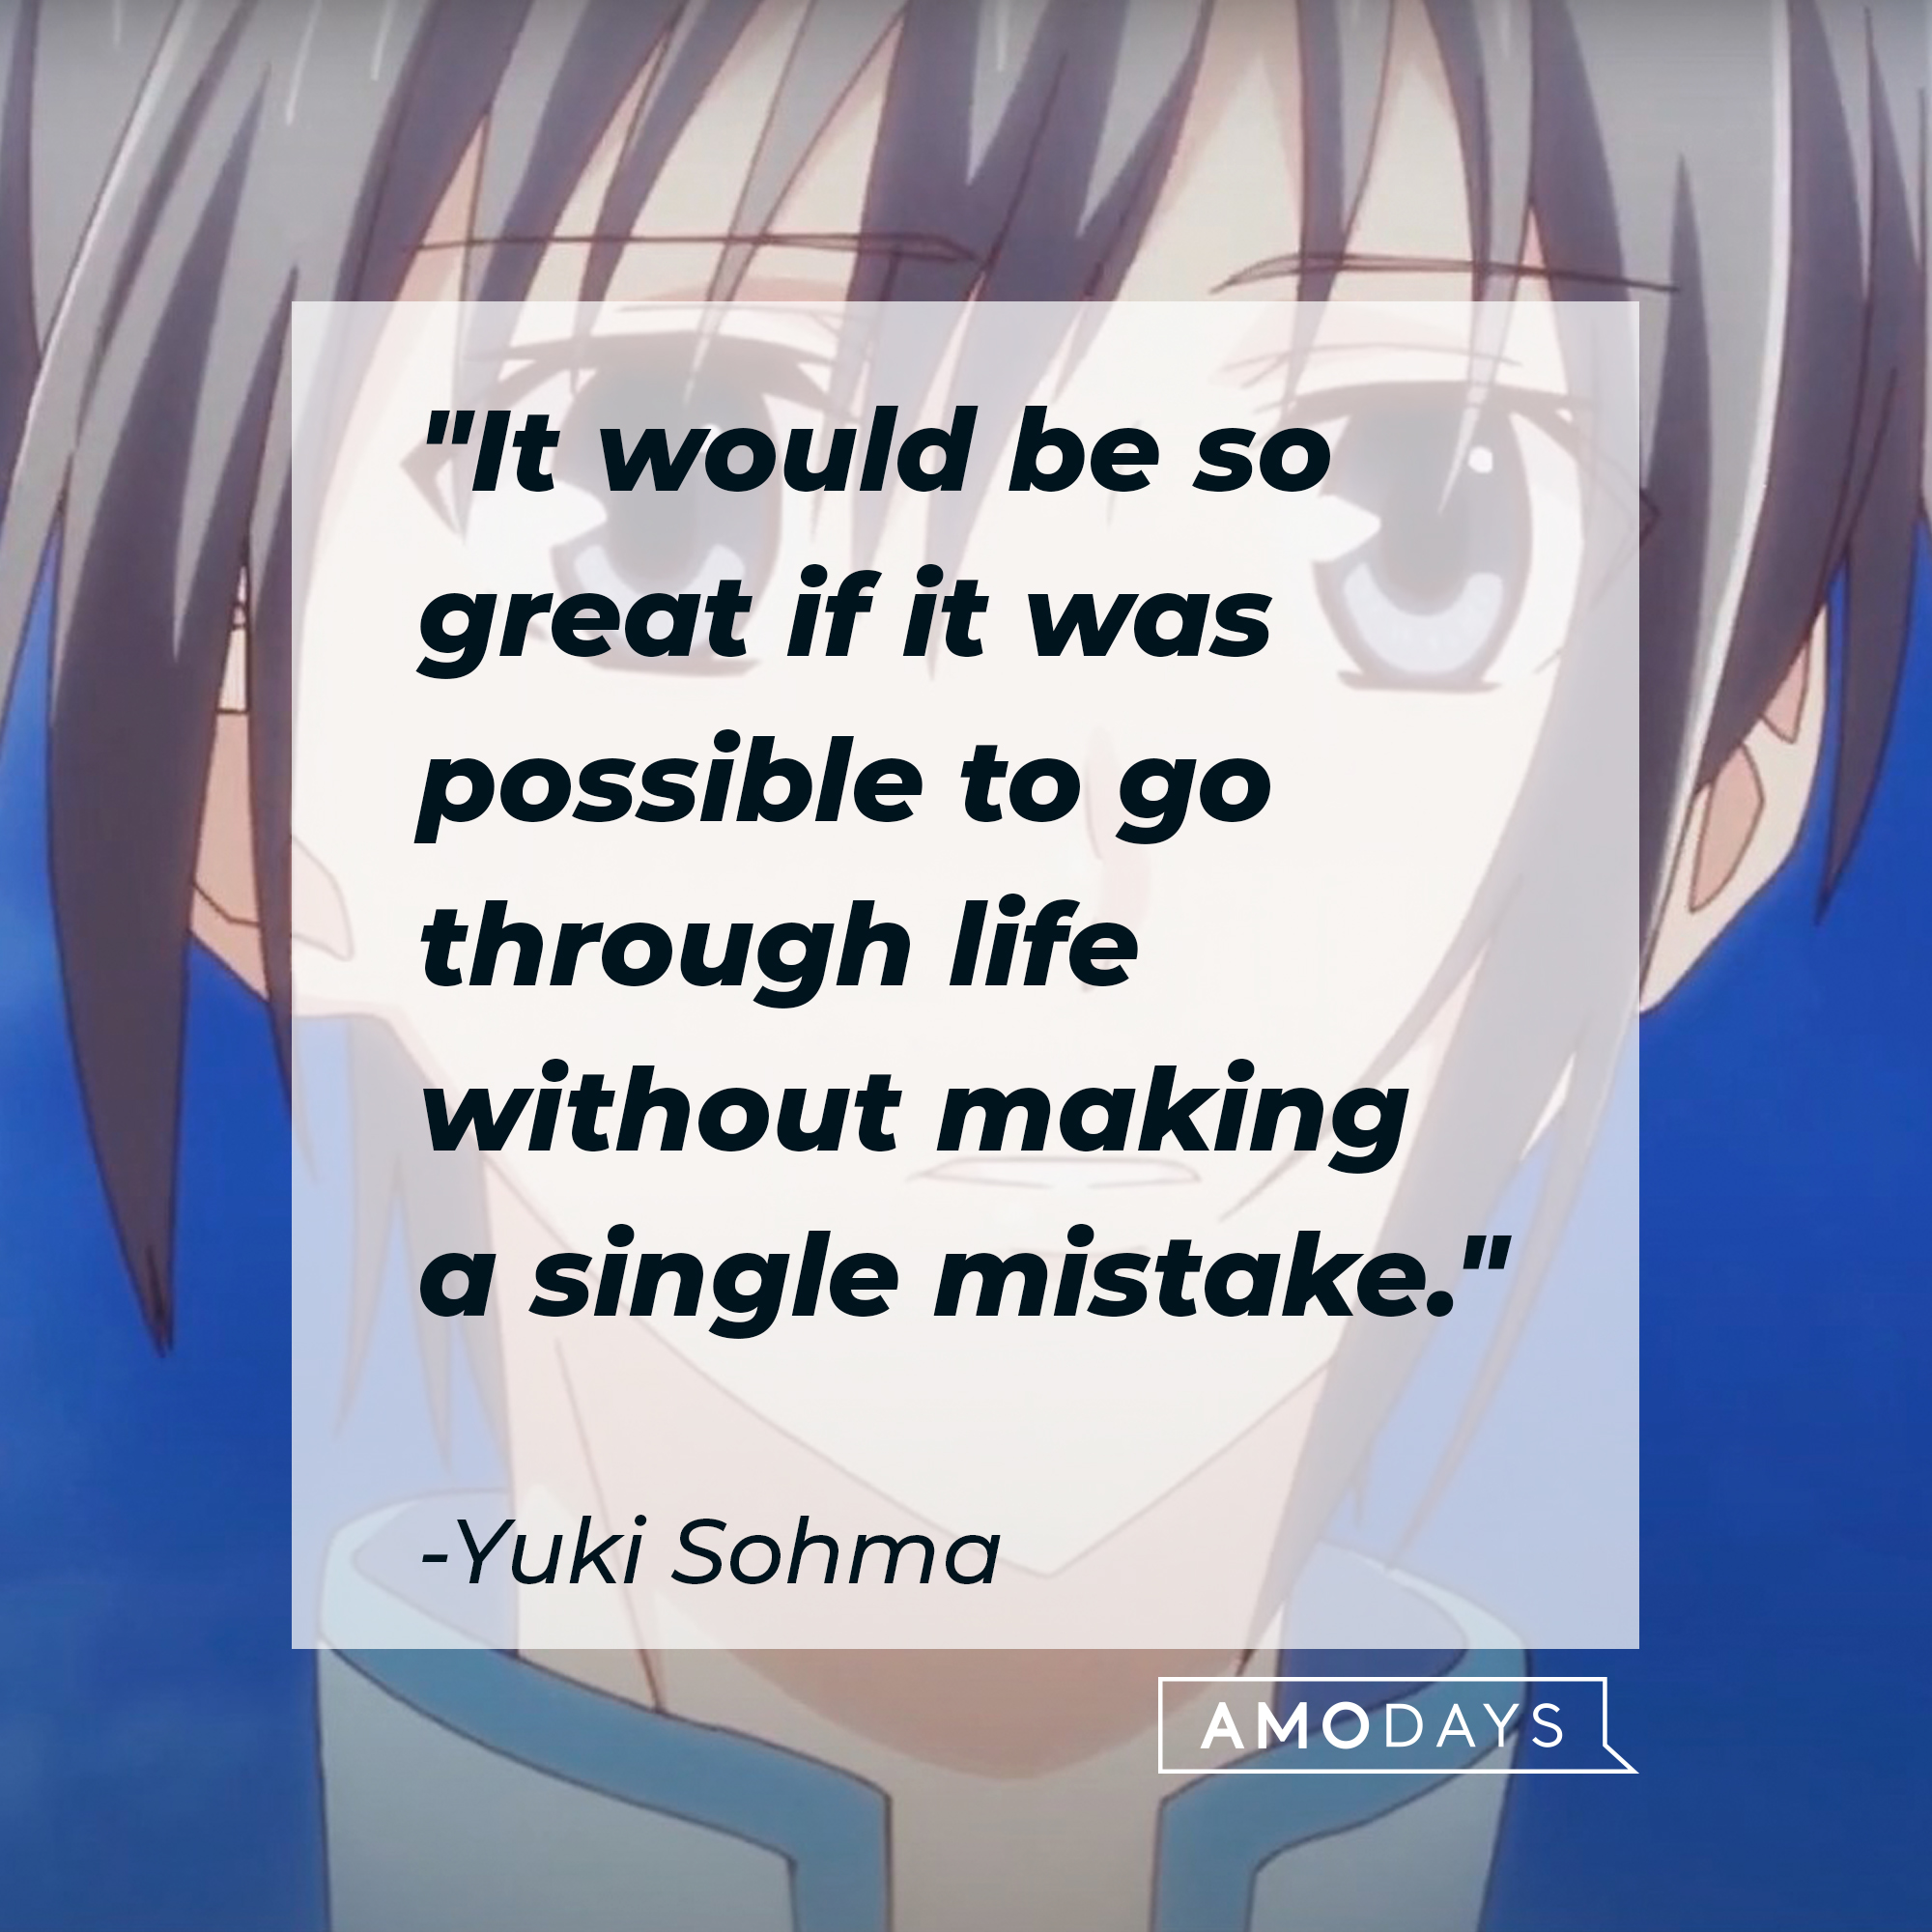 Yuki Sohma's quote: "It would be so great if it was possible to go through life without making a single mistake." | Source: Facebook.com/FruitsBasketOfficial